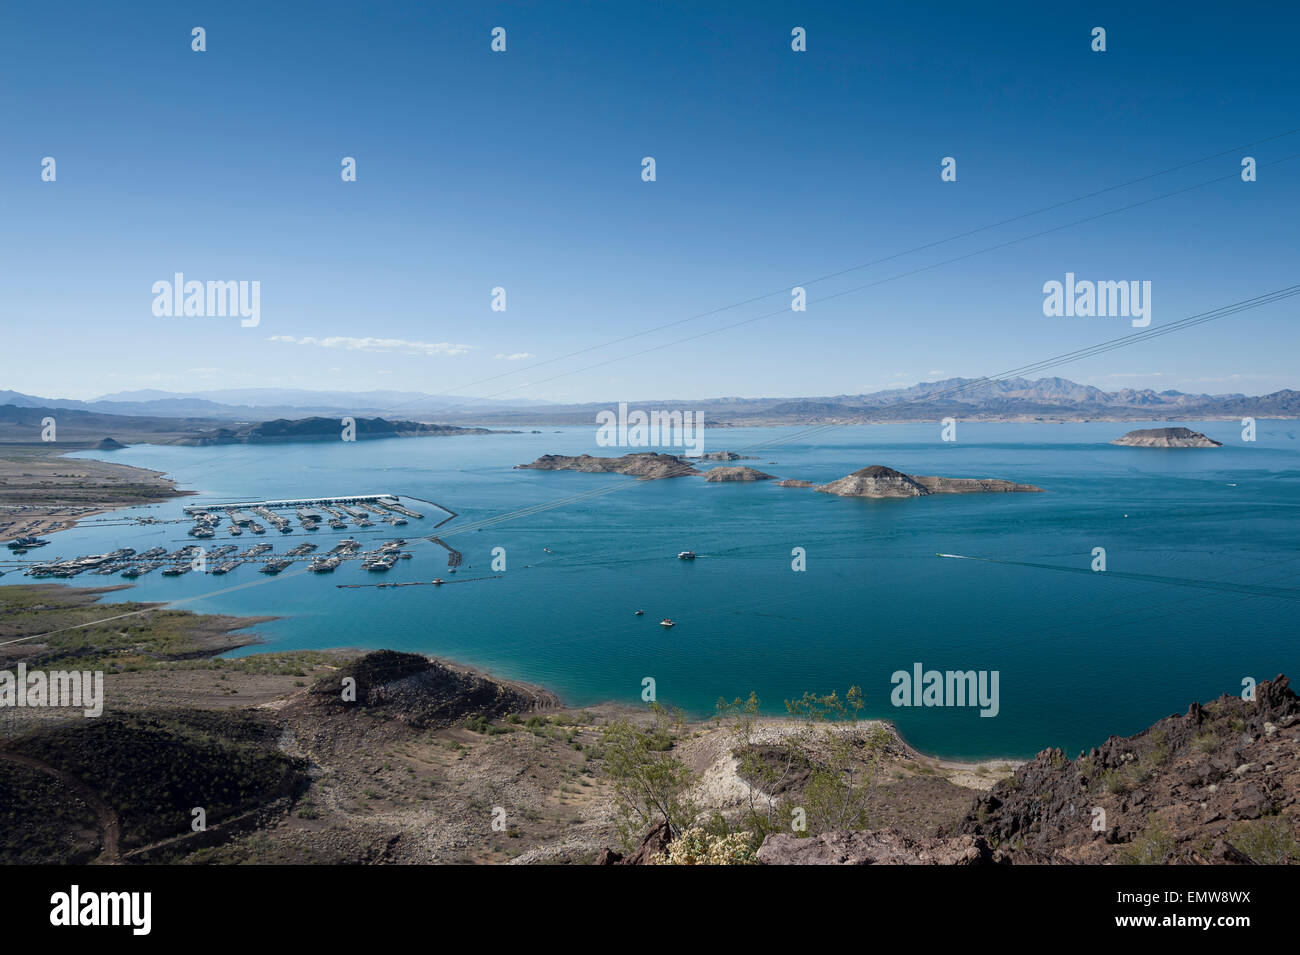 Hoover Dam impounds Lake Mead, the largest reservoir in the United States. Stock Photo